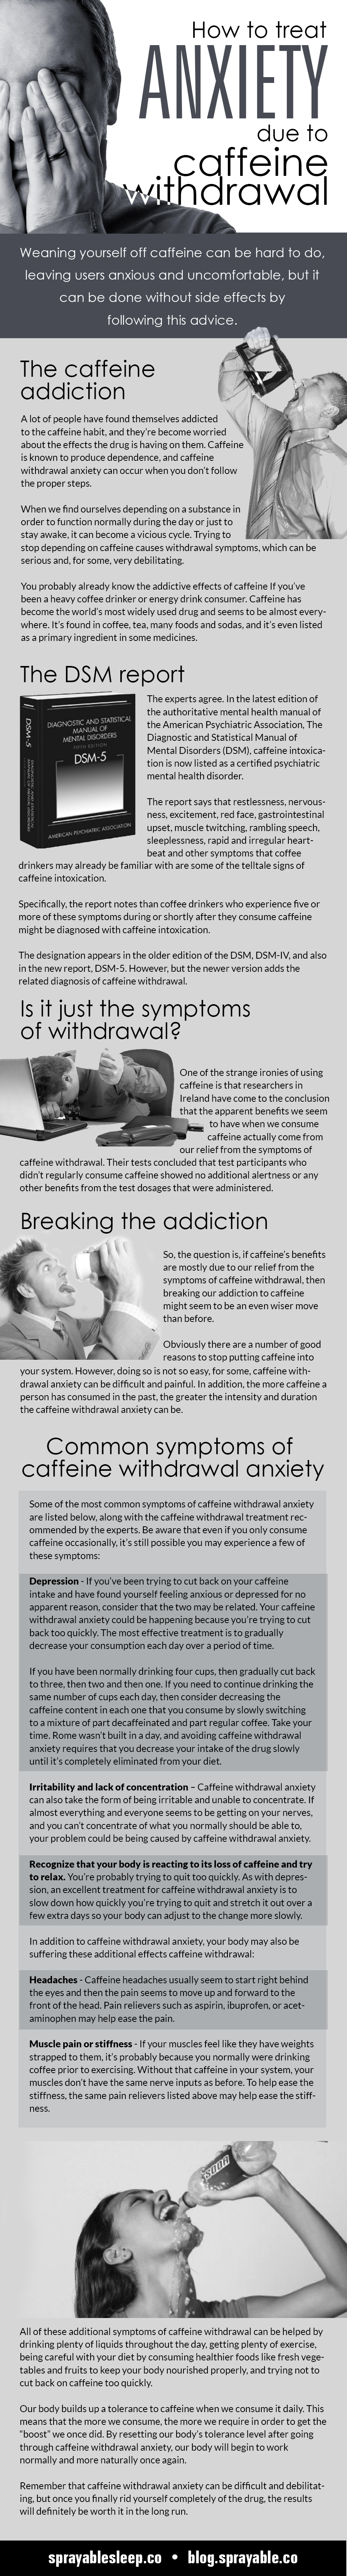 How to treat Anxiety due to caffeine withdrawal | Visual.ly